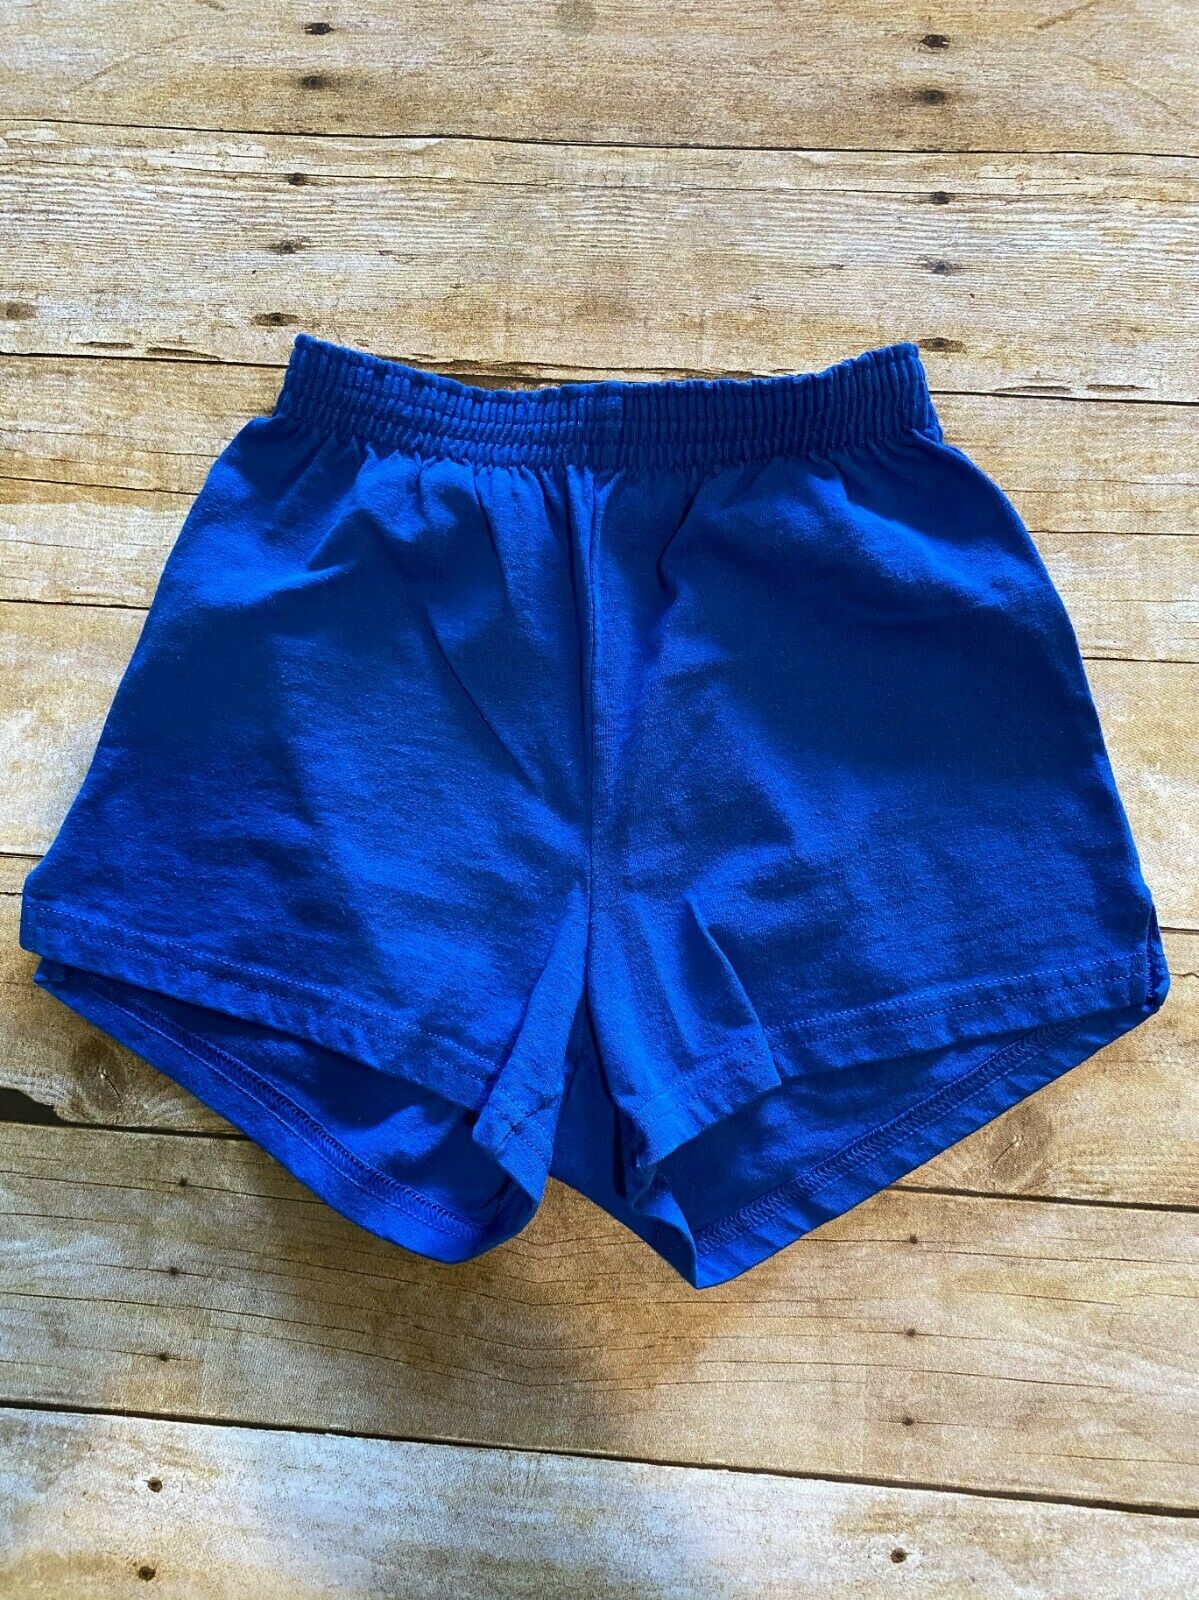 Soffe Youth L 12/14 Blue Cotton Blend Athletic Sports Shorts Free Ship